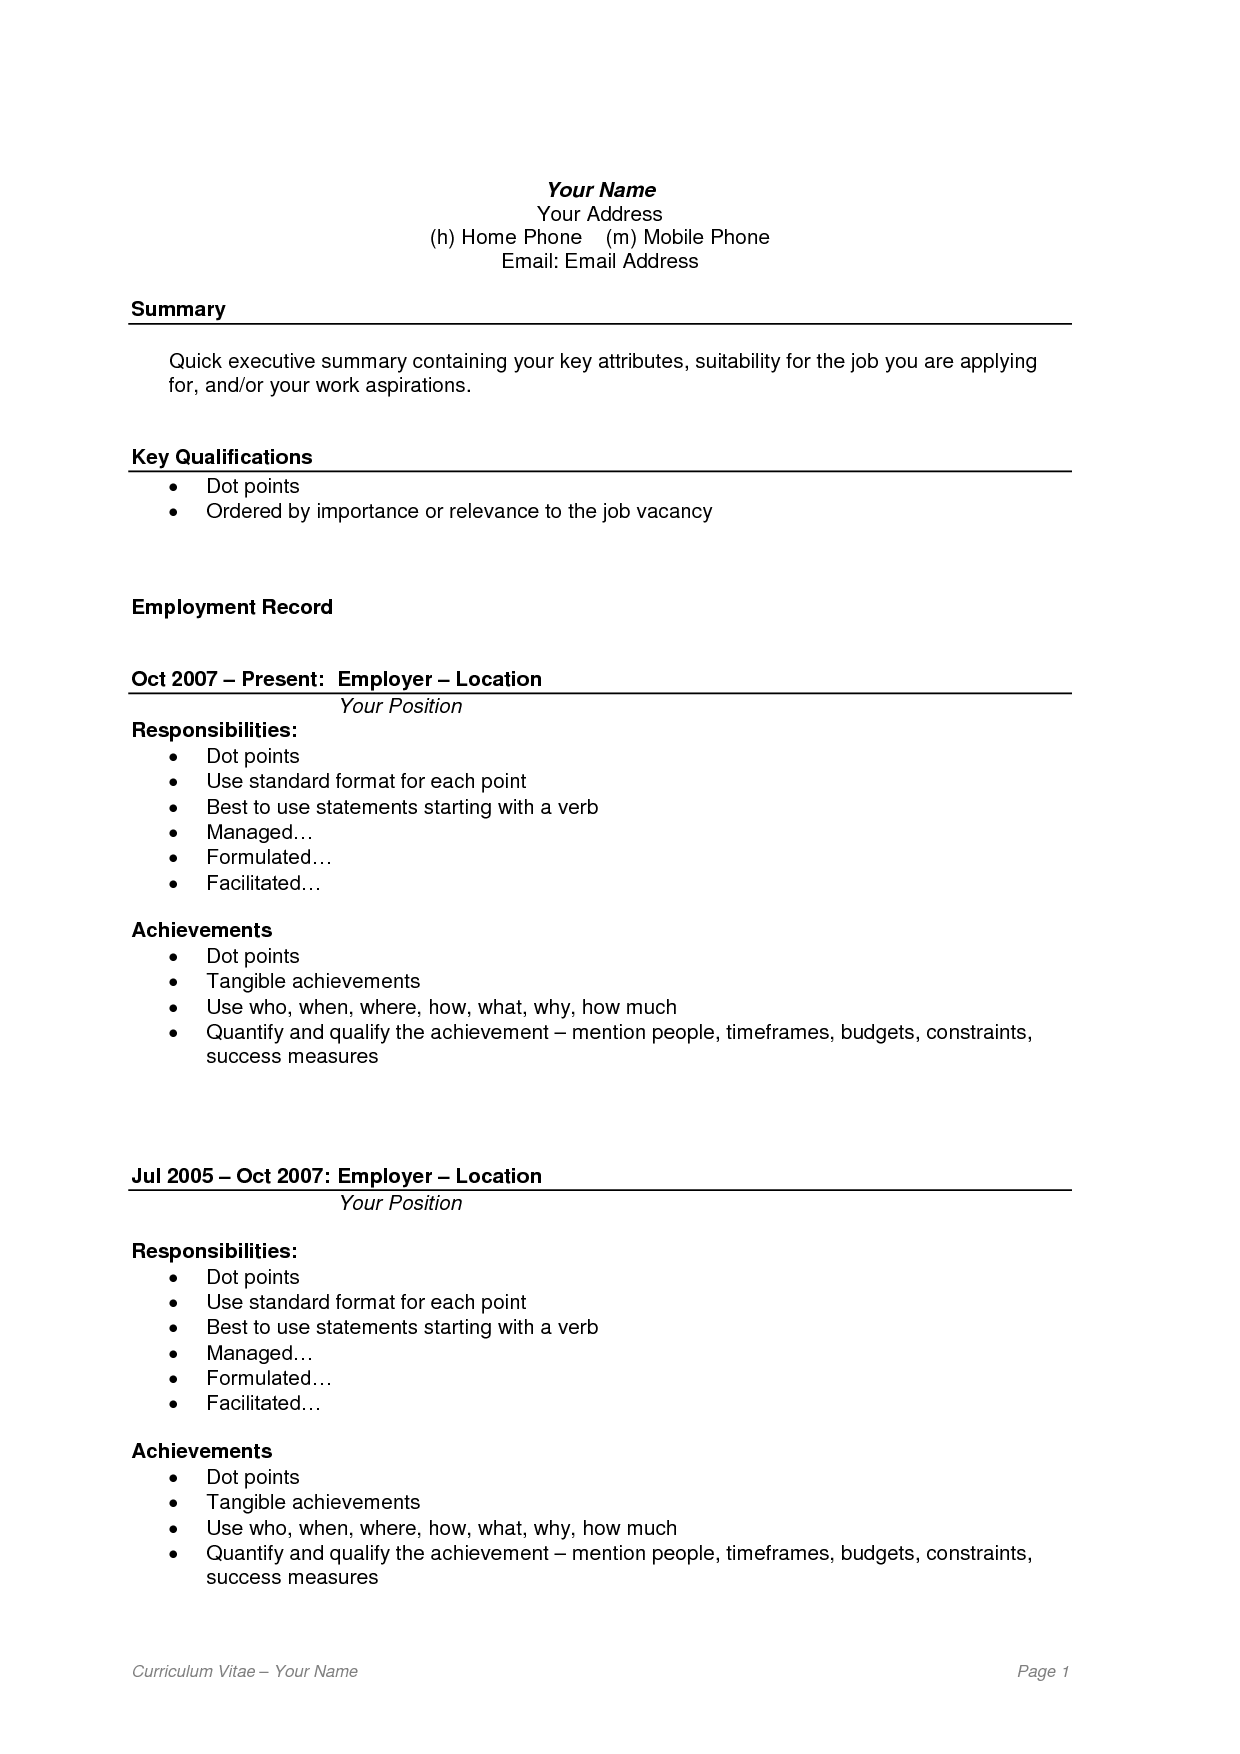 example cv in english free download